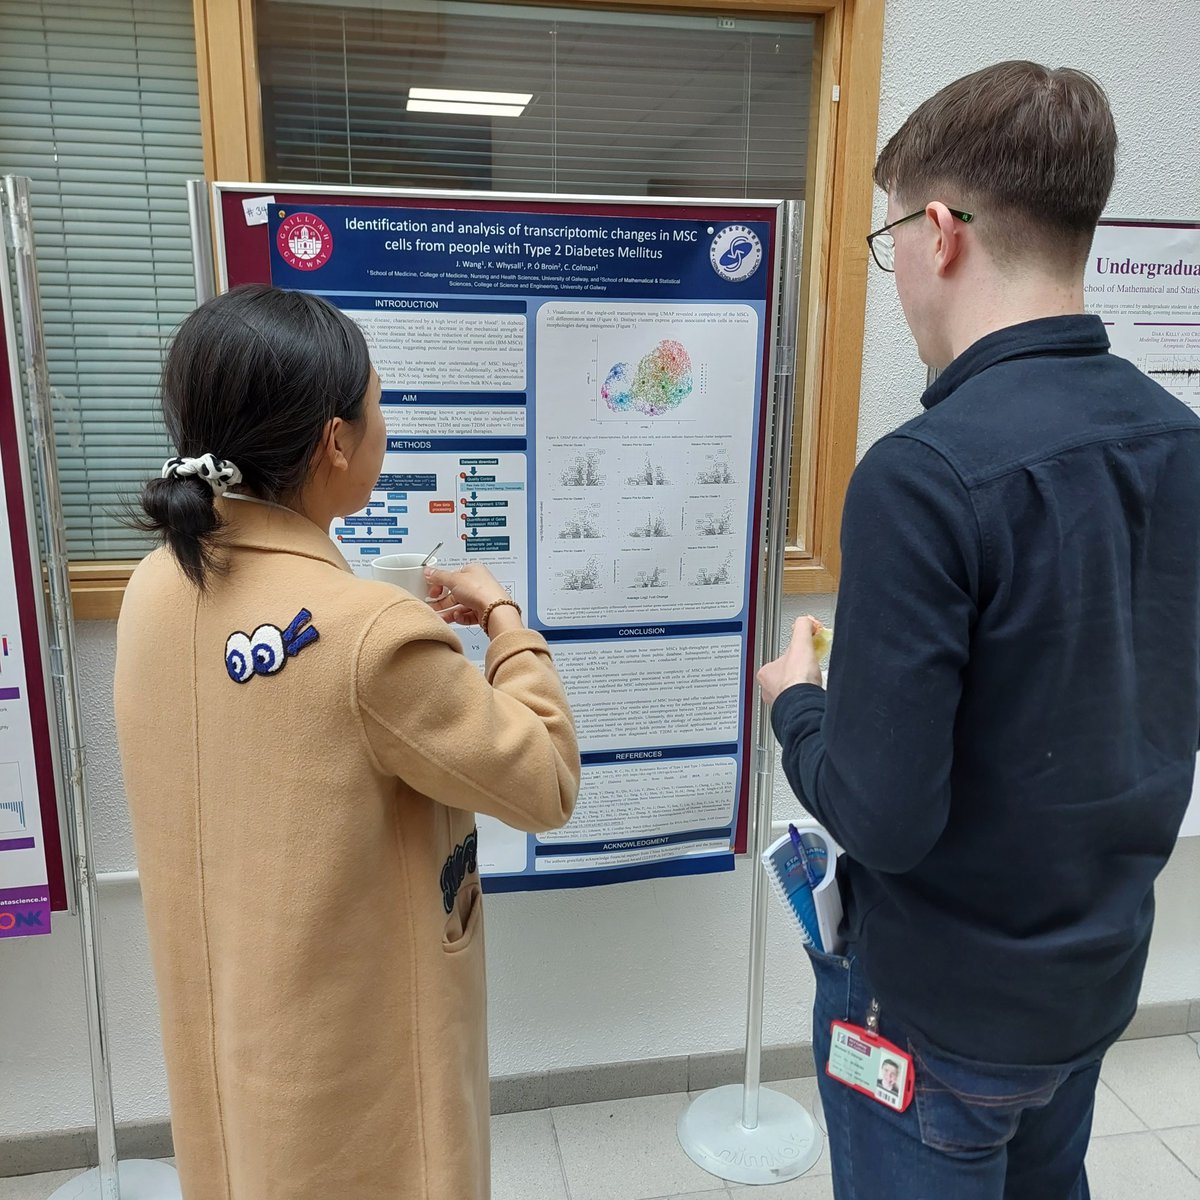 Fantastic research from the lab on display at the annual School Research Day. Congratulations to all who presented, including @kev_ryan_95 who won a runner-up prize in the best poster competition!